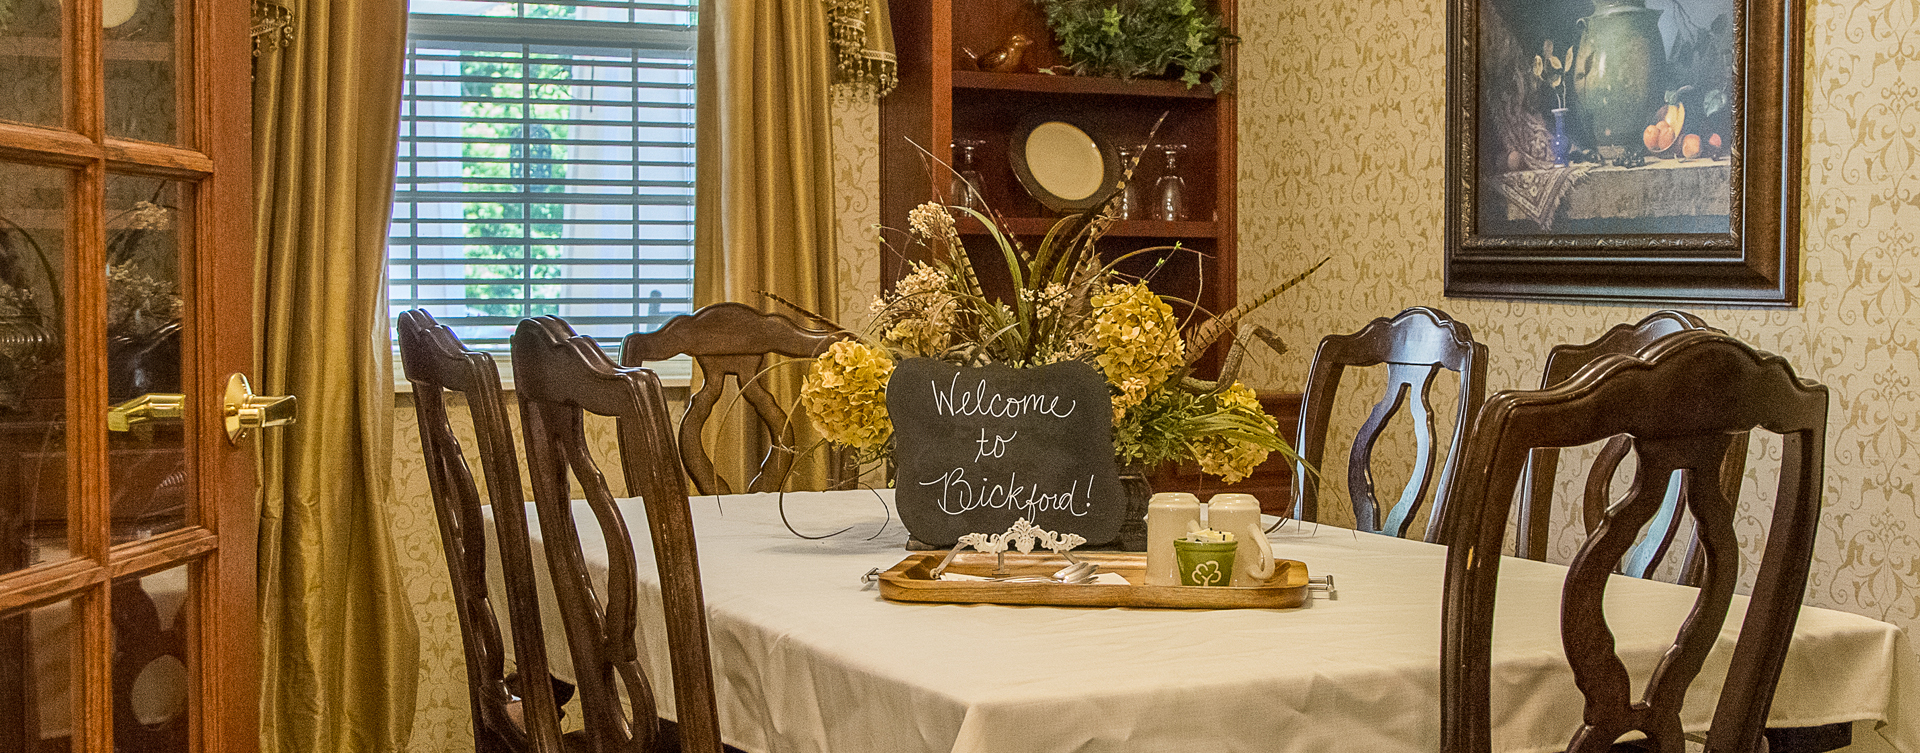 Have fun with themed and holiday meals in the private dining room at Bickford of Moline